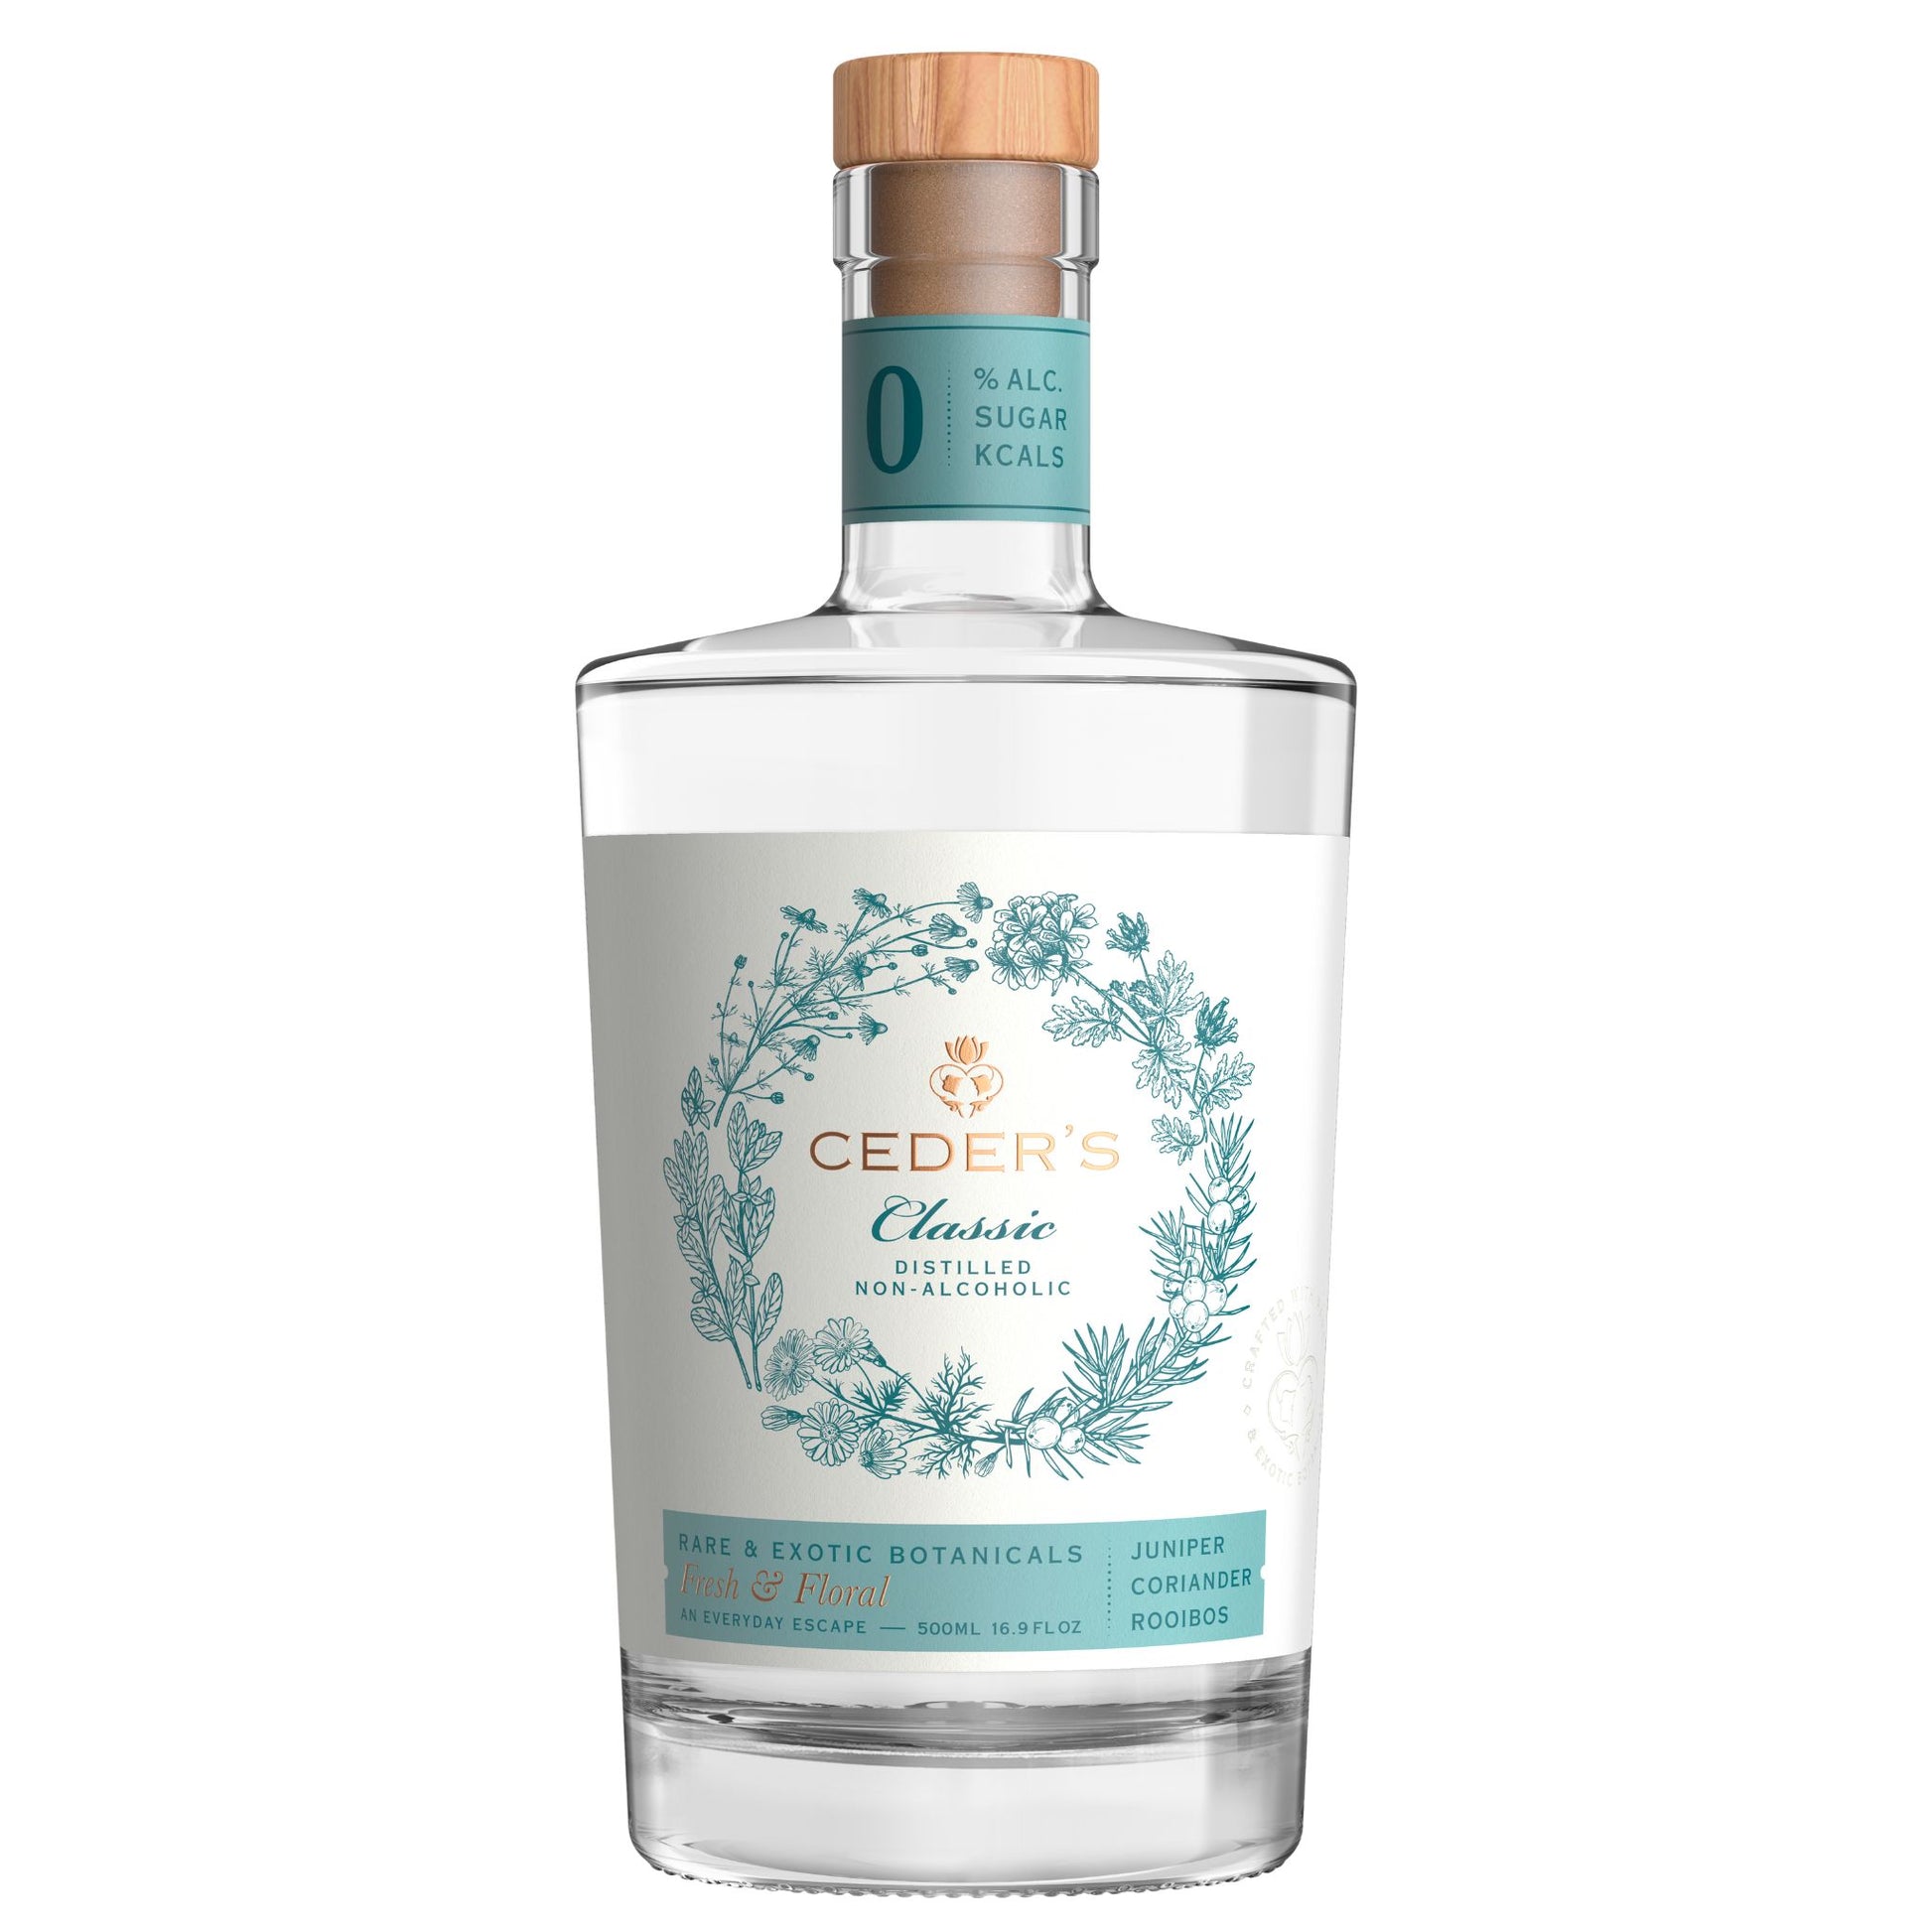 A photo of a bottle of Ceder's Classic handcrafted with rare and exotic botanicals. Distilled non-alcoholic spirit with juniper and coriander. Ceder's is carried at Knyota Non-Alcoholic Drinks from knyota.com